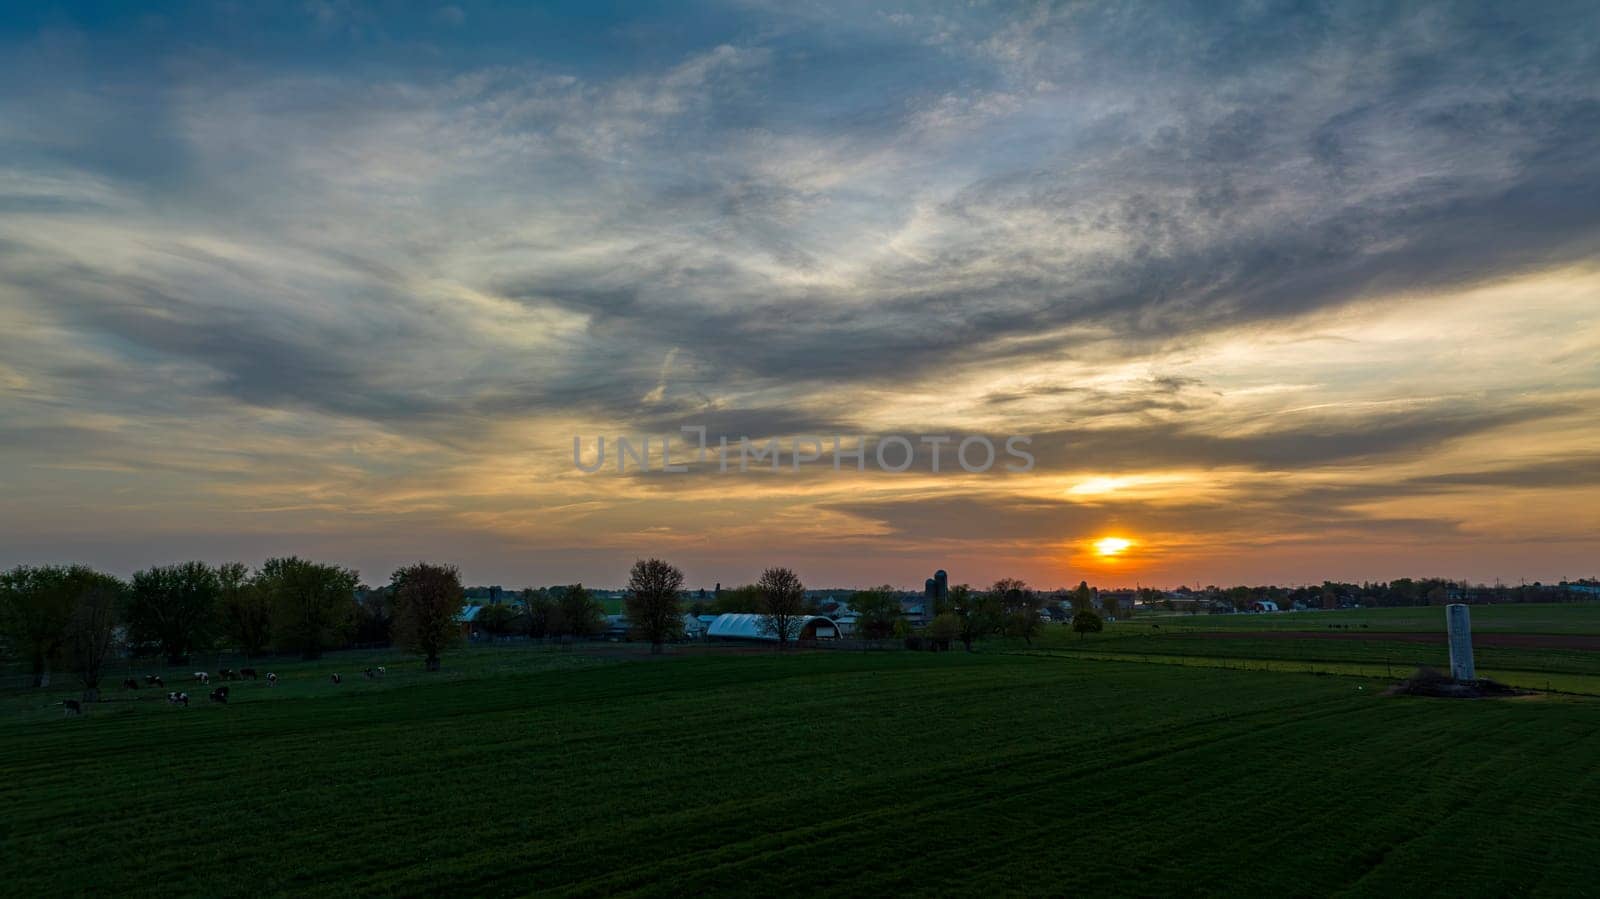 Aerial View of Dramatic Sunset Casting A Warm Glow Over A Rural Landscape With Silhouetted Trees And Buildings Under A Cloud-Streaked Sky.